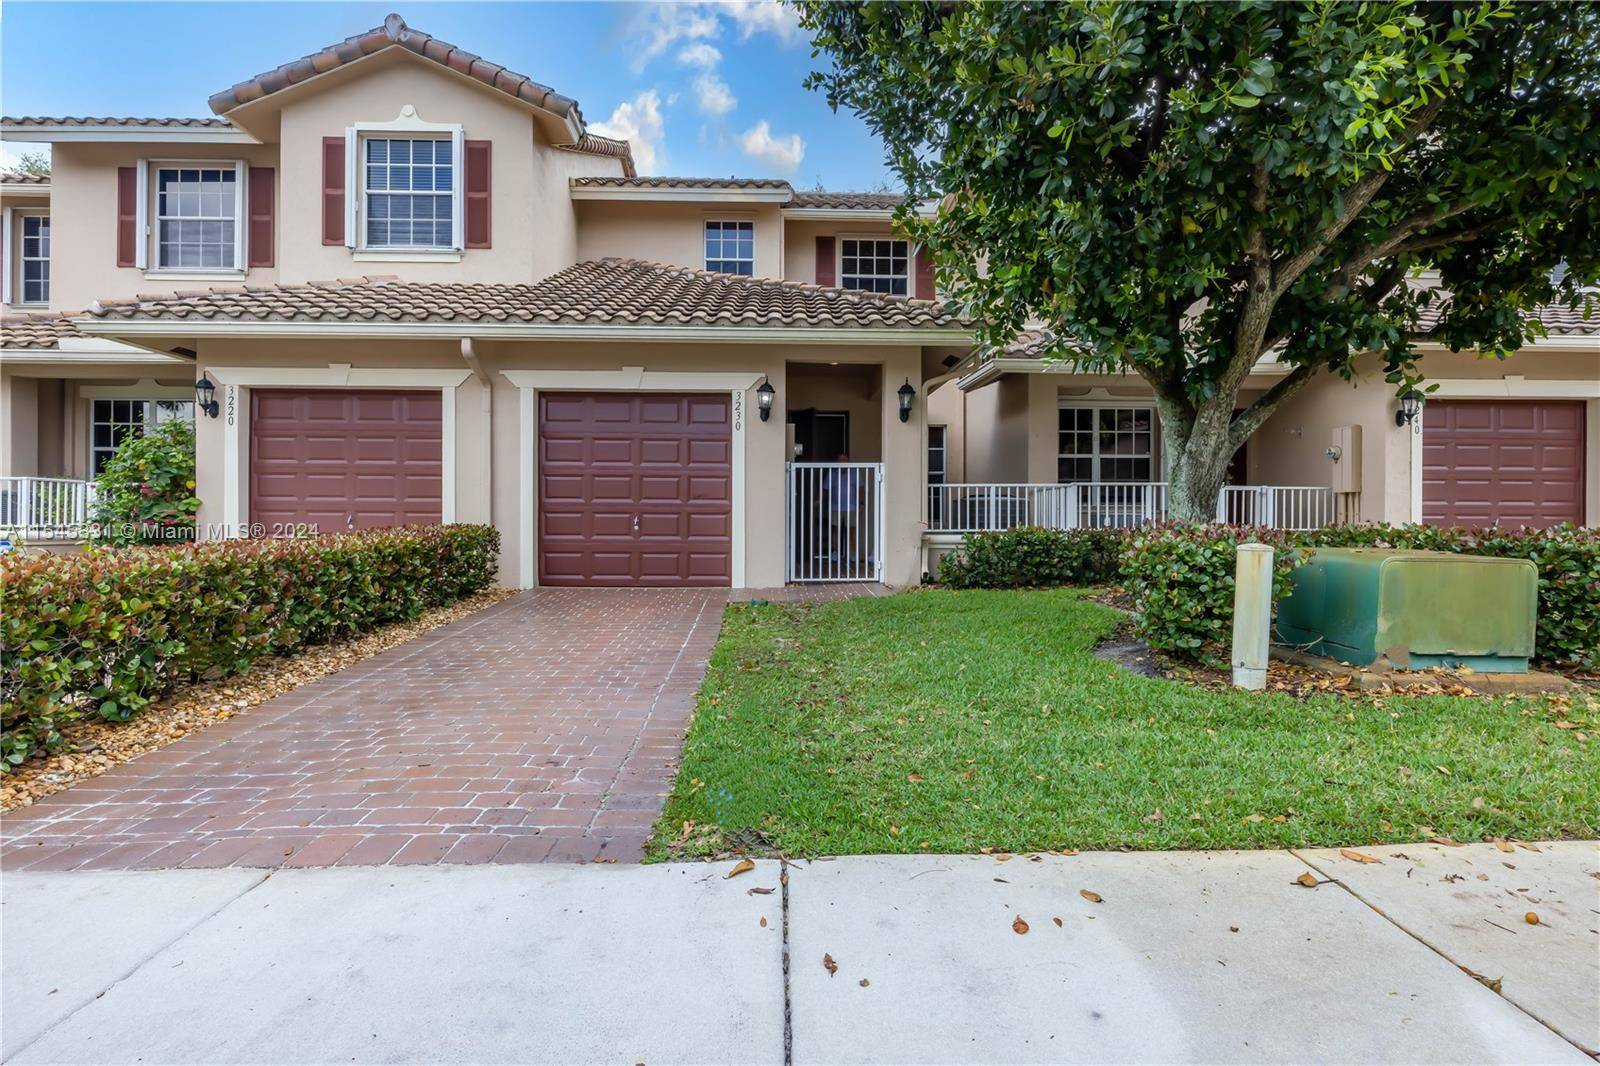 This beautiful 3 bedroom 2 1 2 bathroom townhouse in desirable Villas of Rolling Hills is very near Nova Southeastern University and borders the fabulous Grand Oaks Golf Club, providing ...